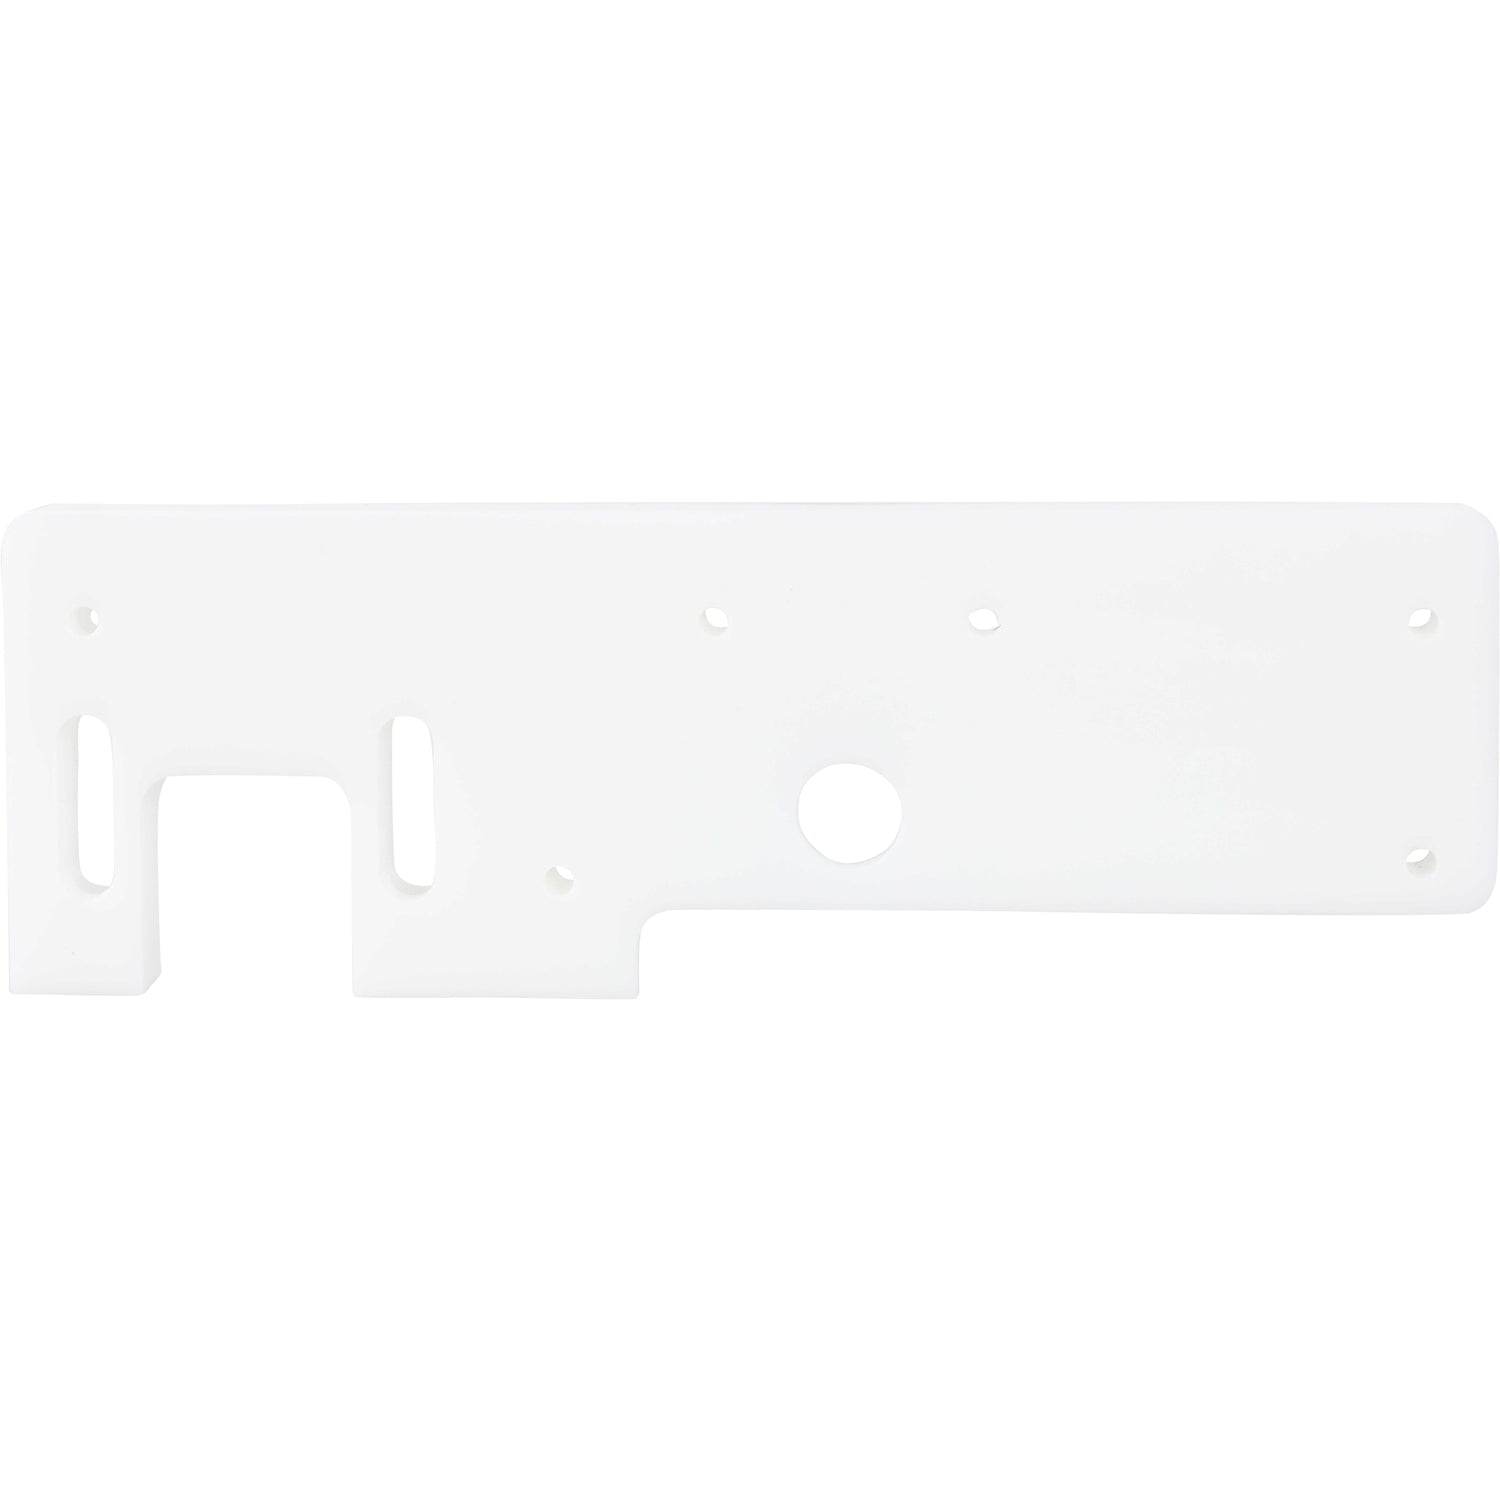 Rectangular, white machined plastic part with multiple mounting holes on white background.